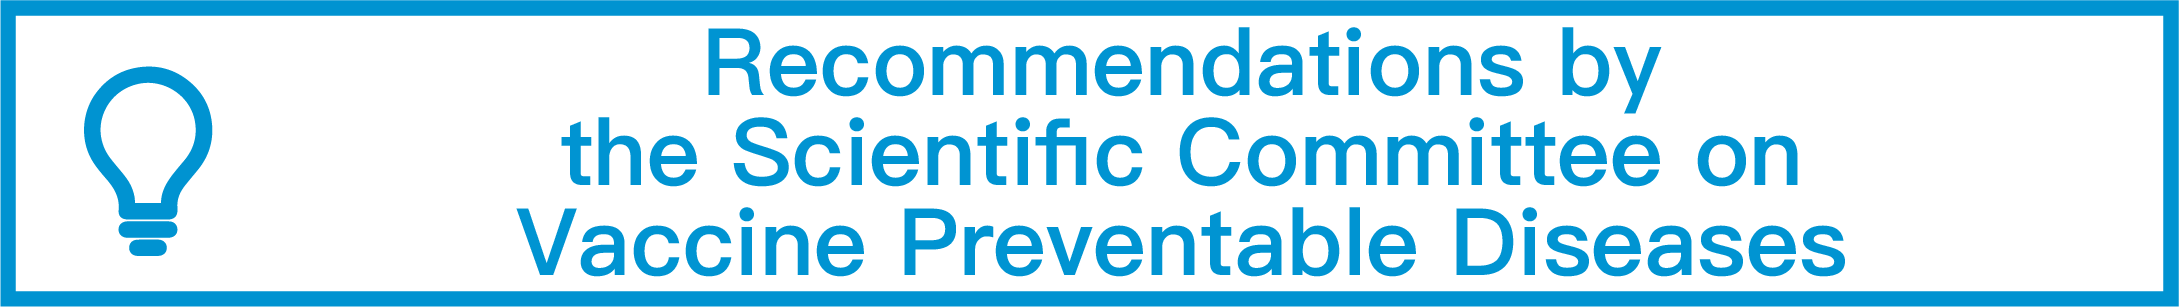 Recommendations by the Scientific Committee on Vaccine Preventable Diseases